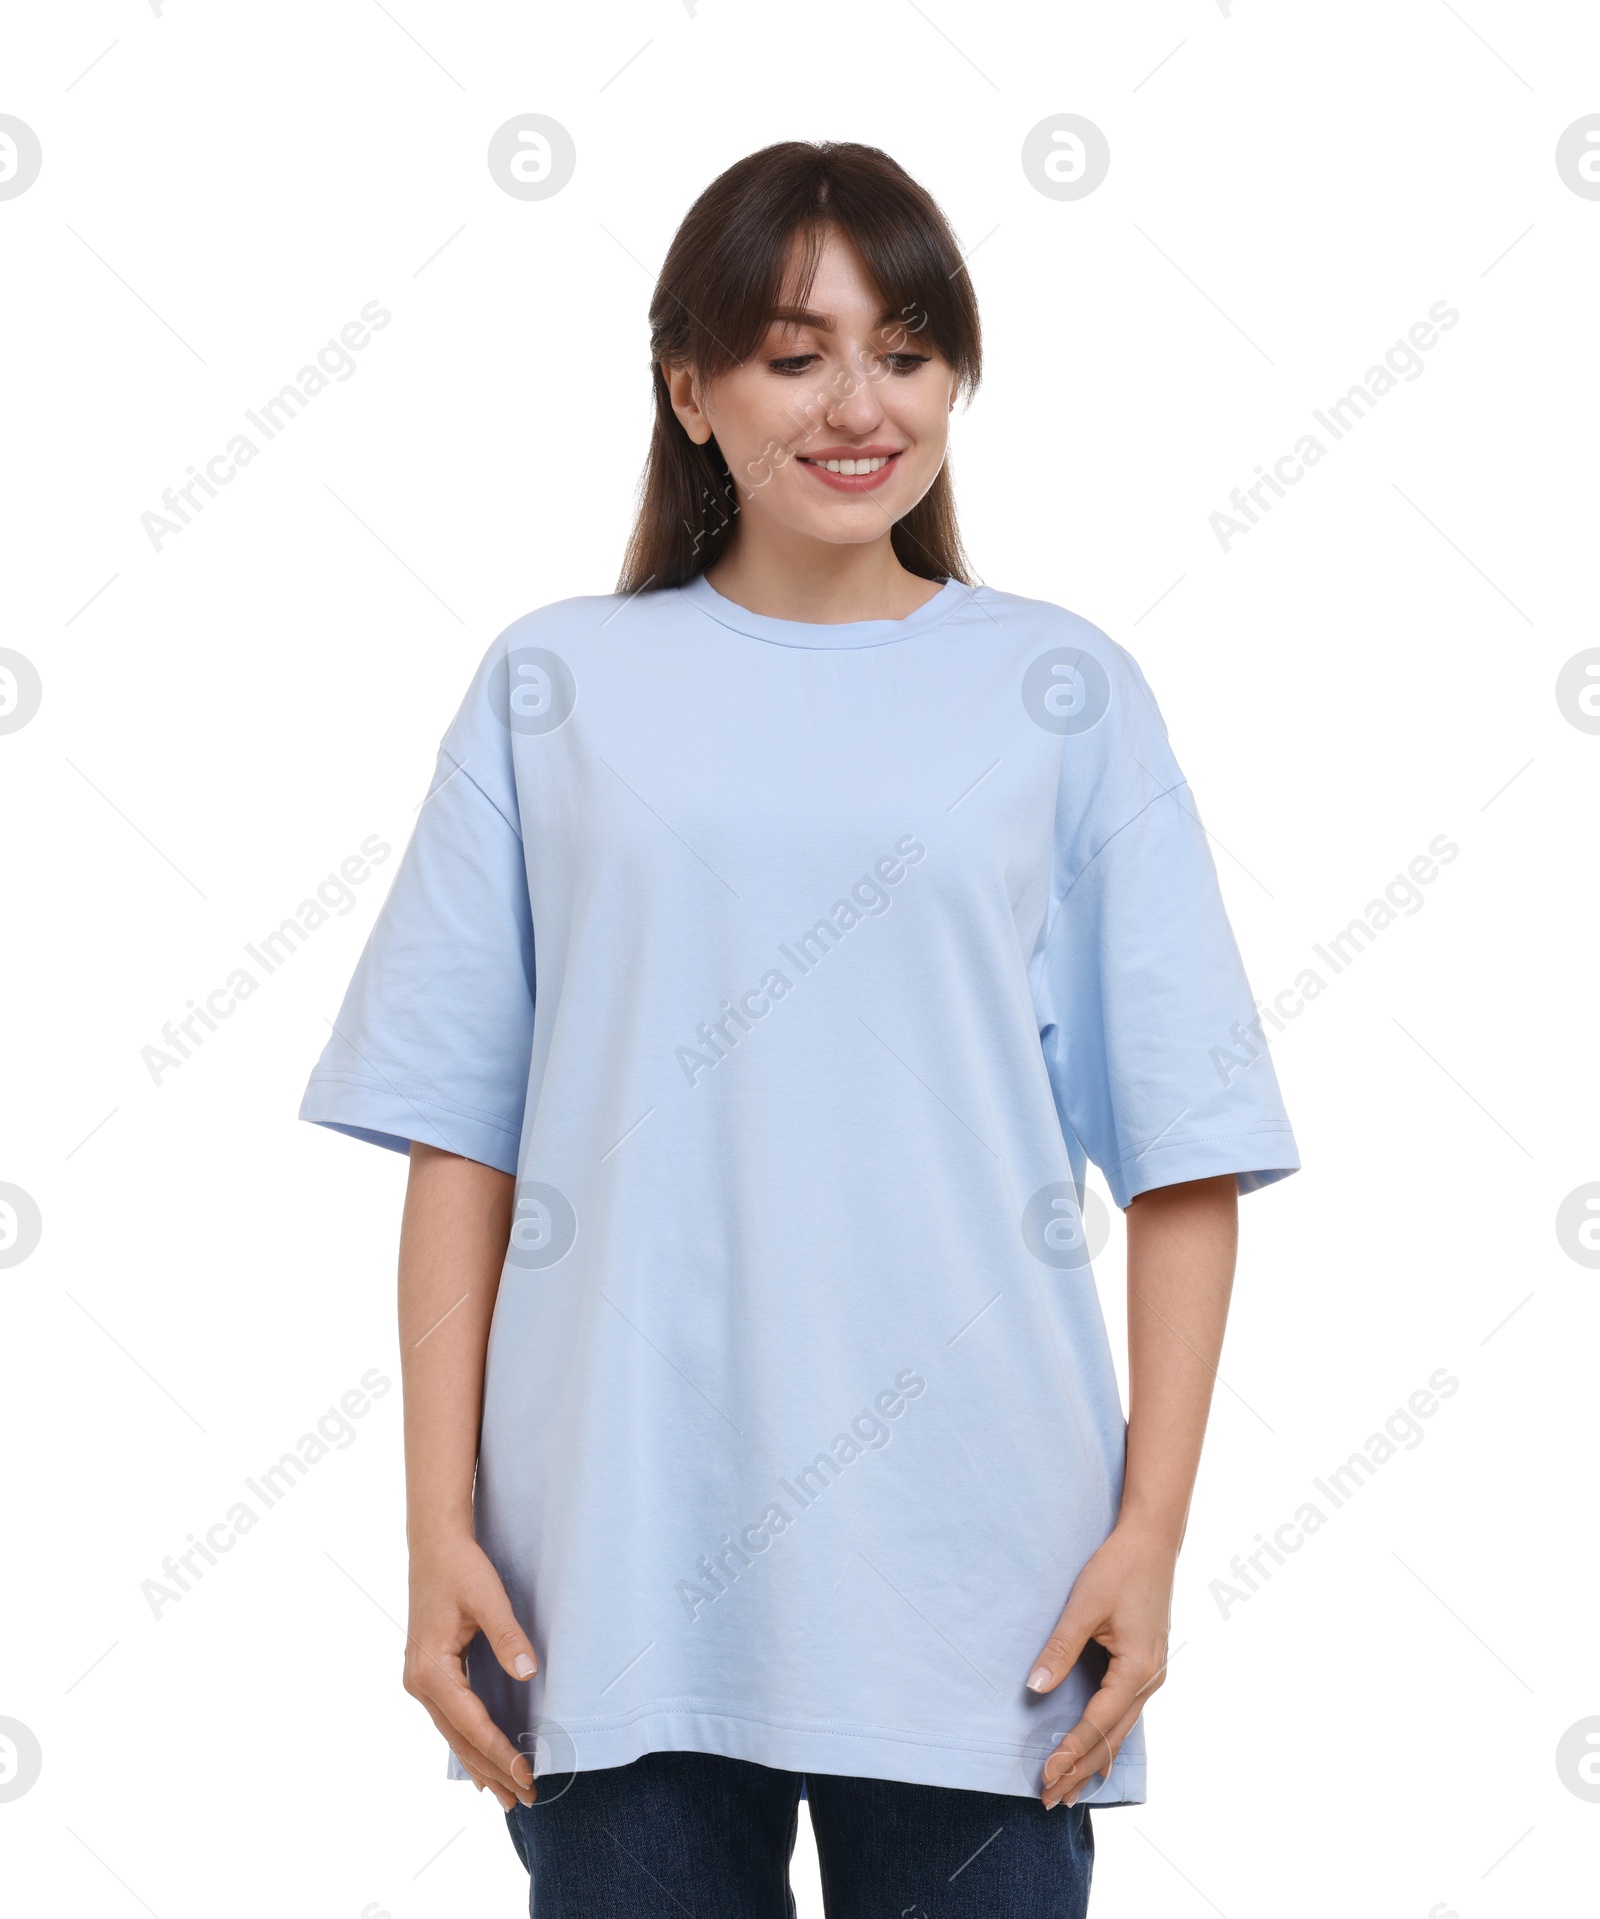 Photo of Smiling woman in stylish light blue t-shirt on white background